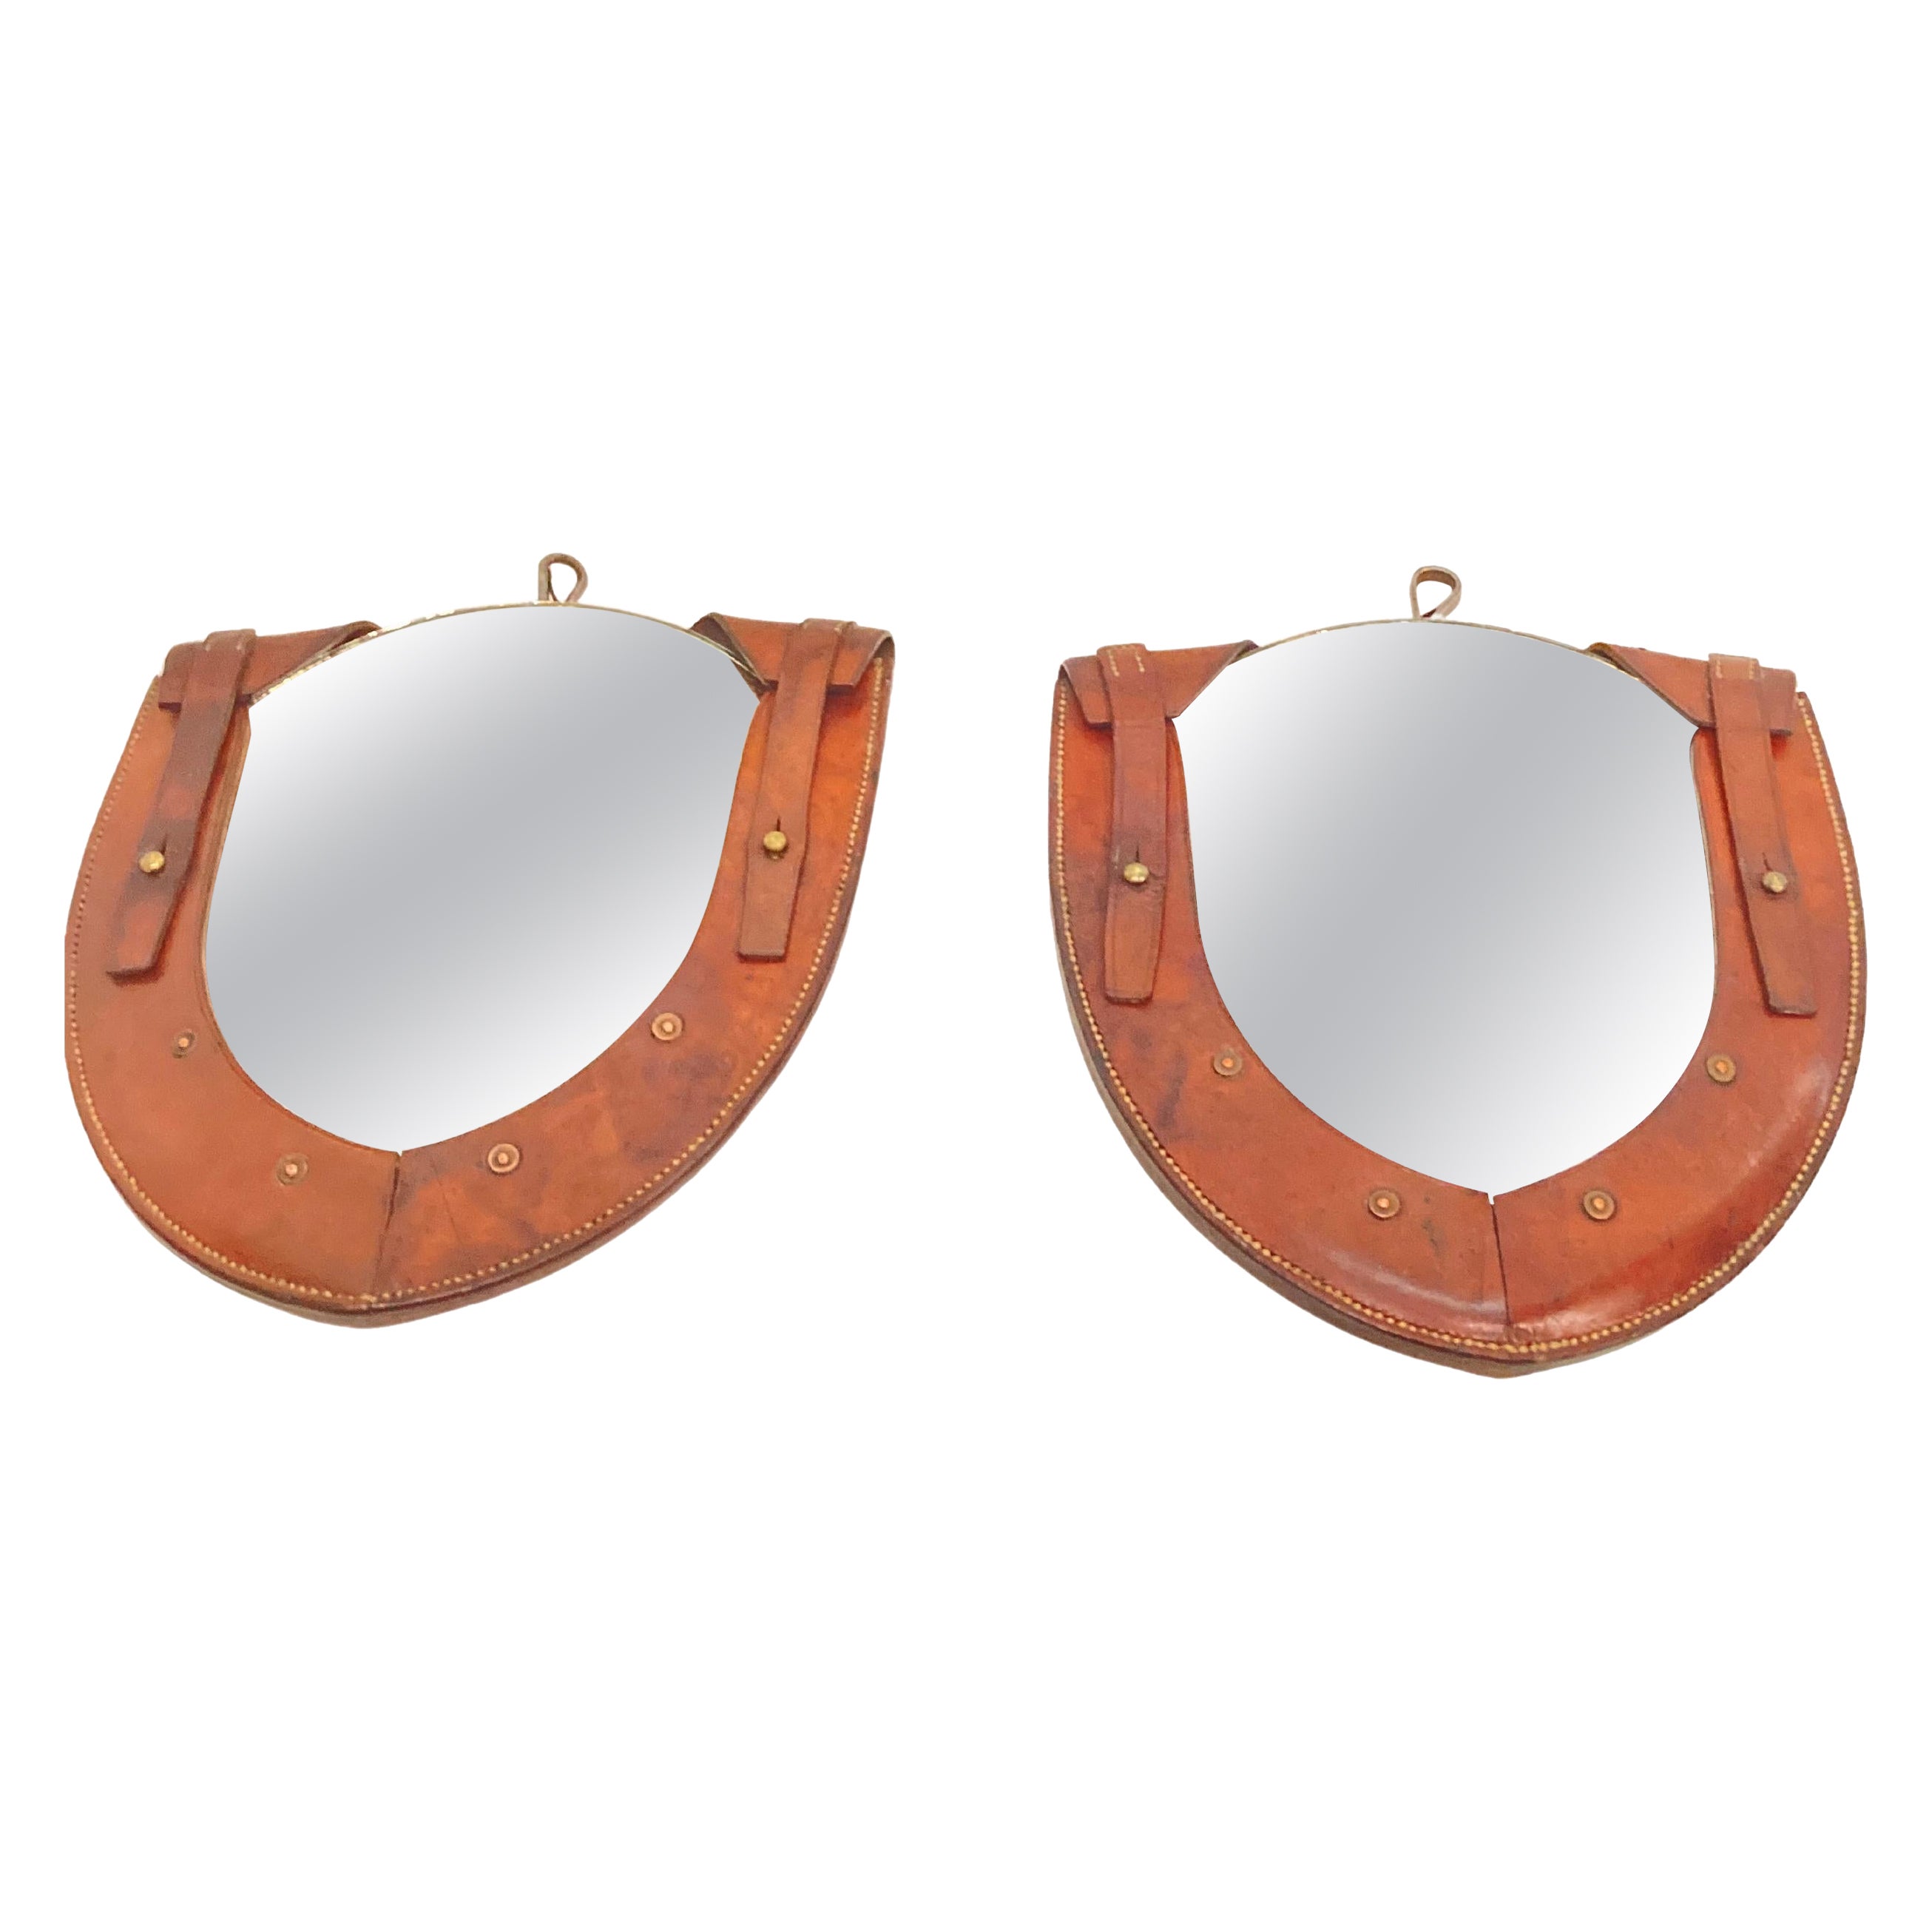 Pair of wall stitched mirror in the style of Jacques Adnet